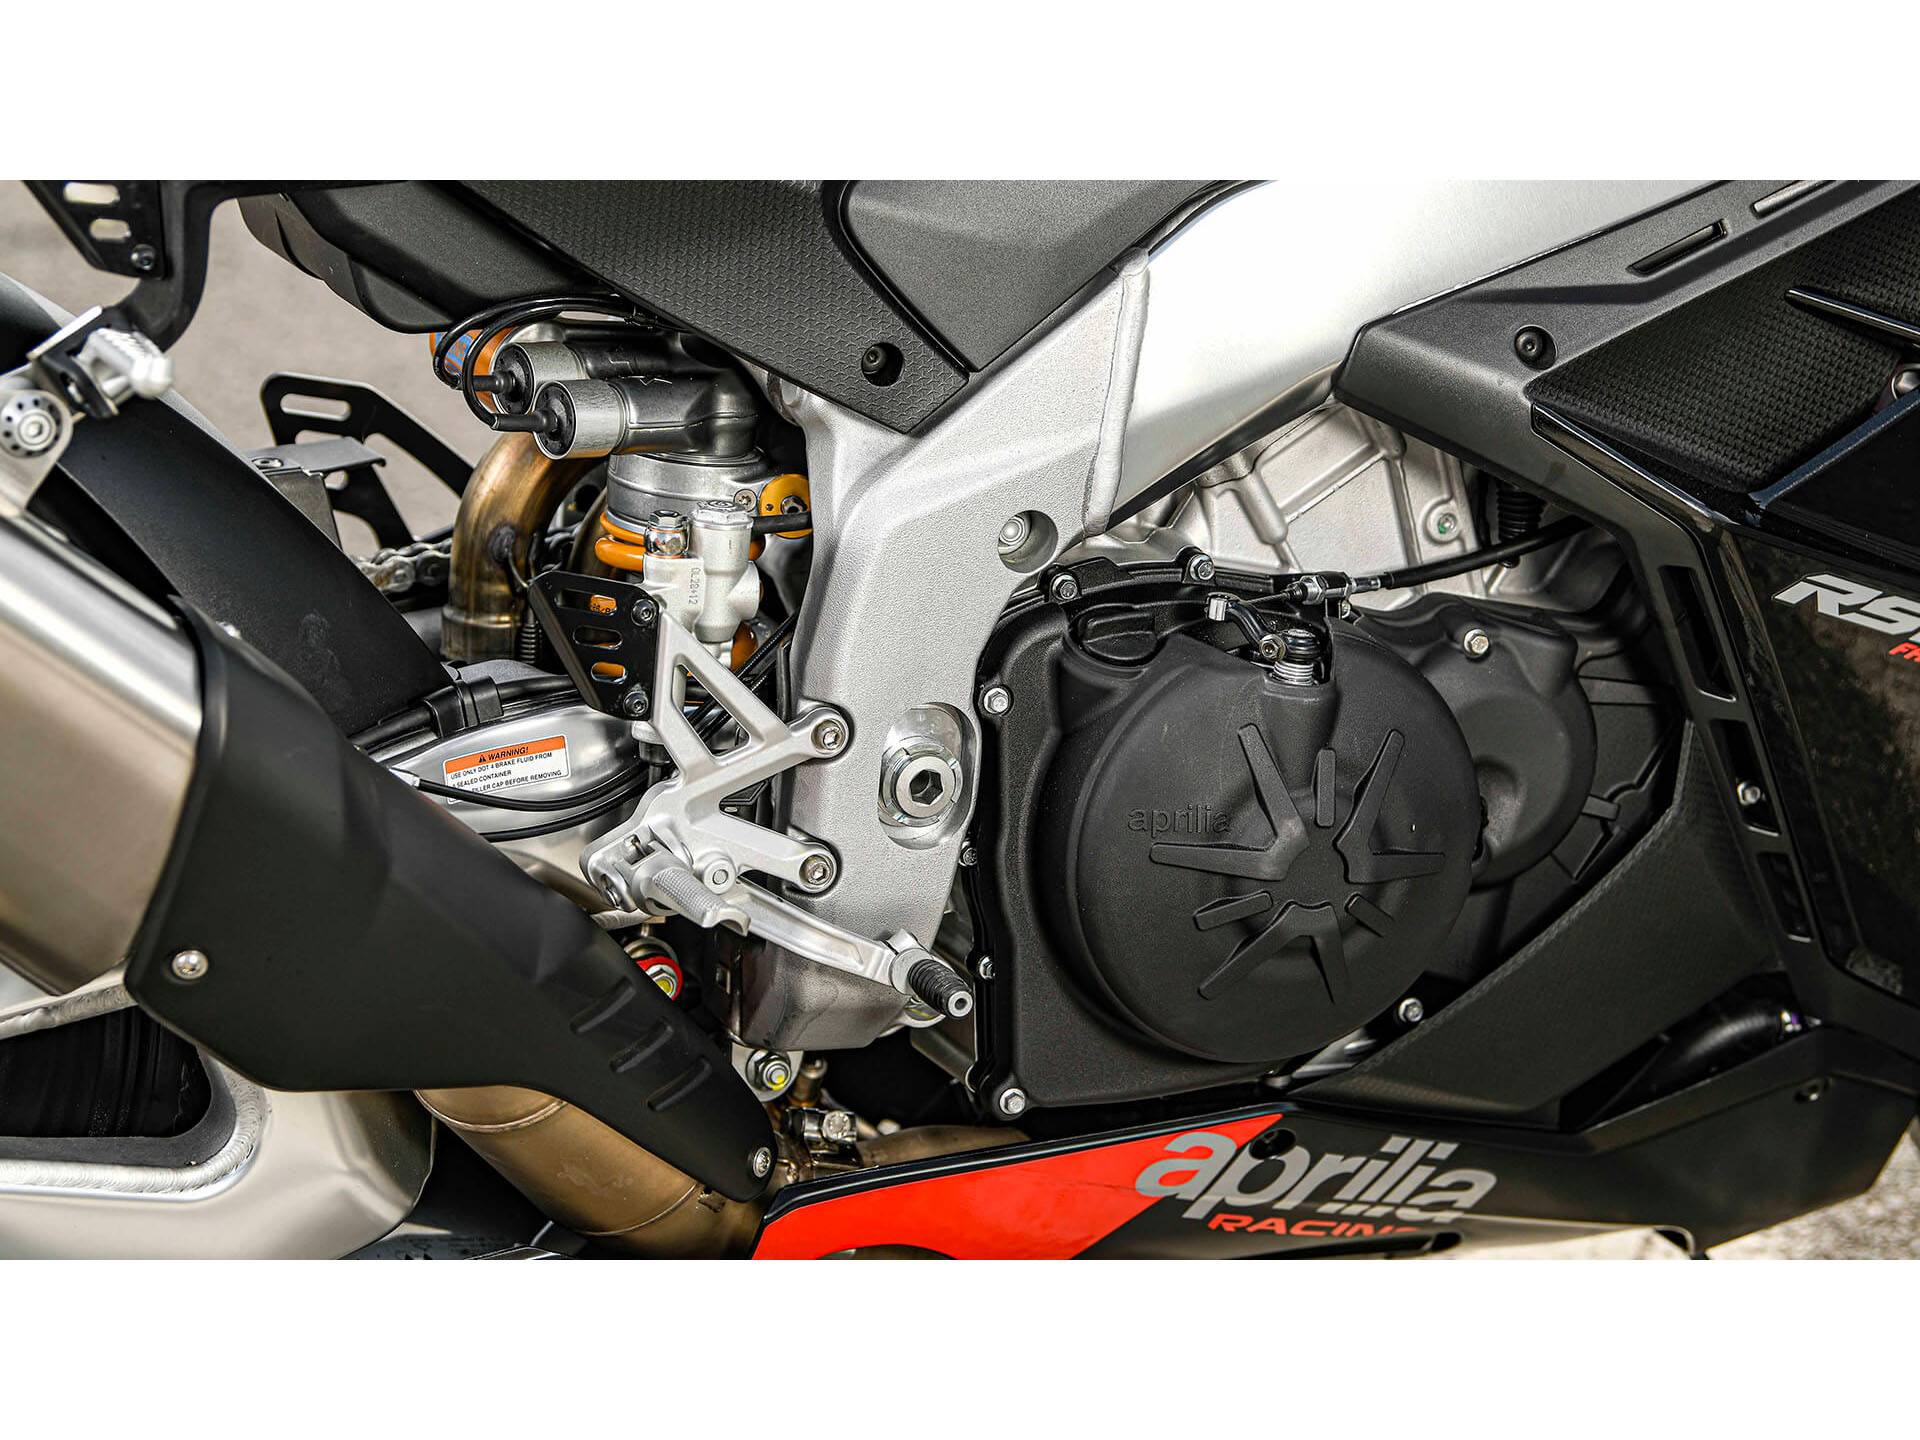 2022 Aprilia RSV4 1100 in Knoxville, Tennessee - Photo 5